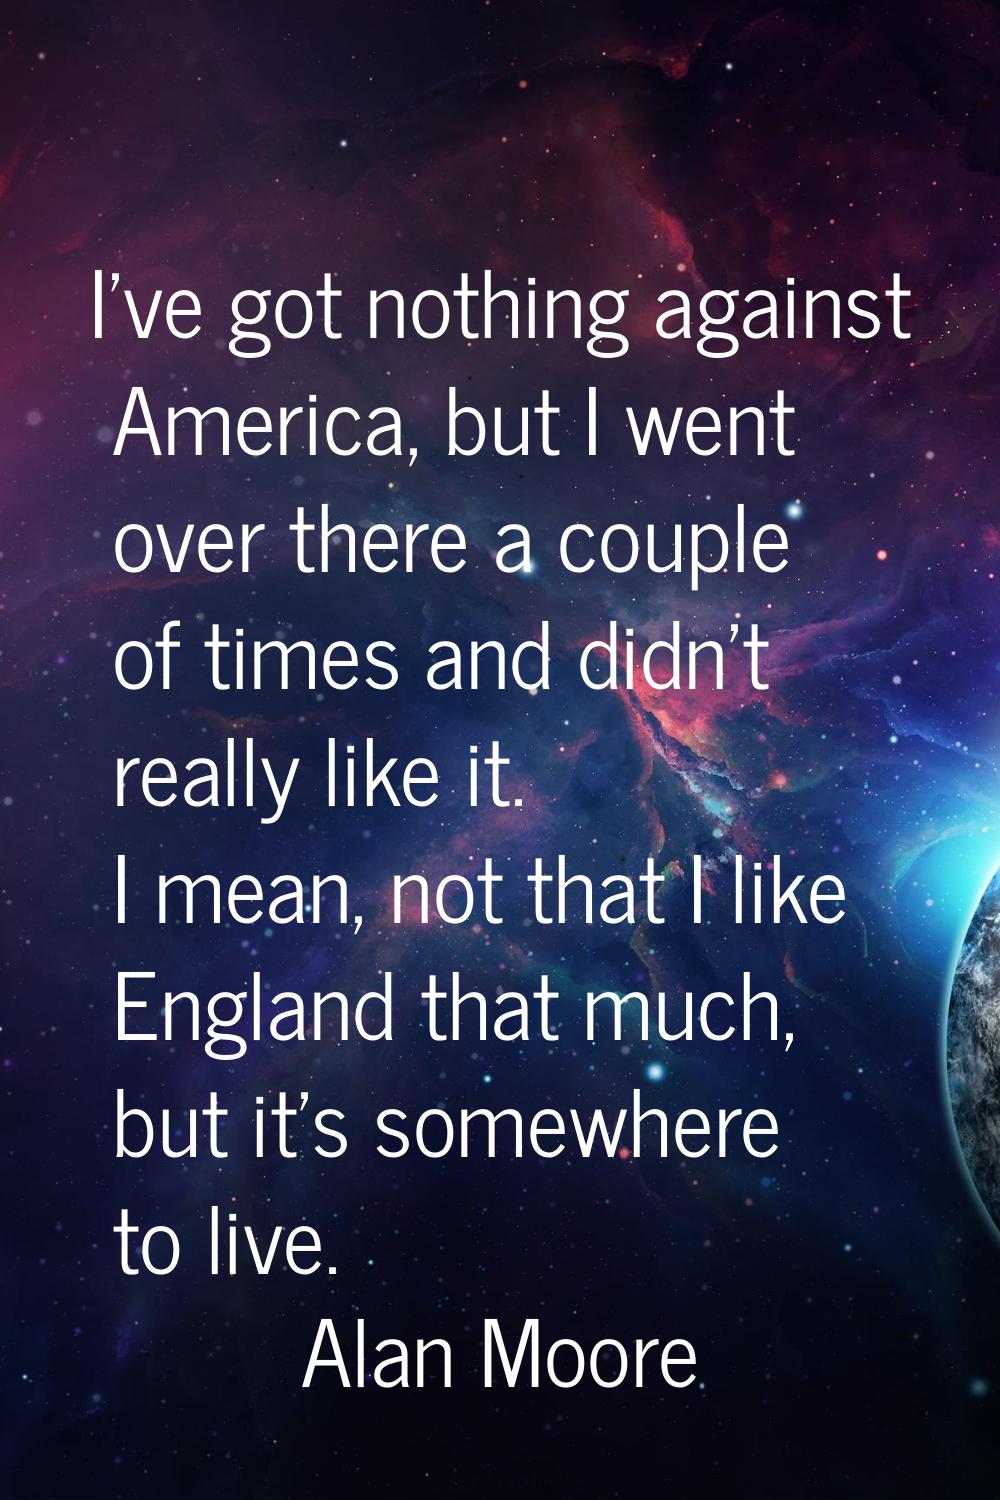 I've got nothing against America, but I went over there a couple of times and didn't really like it